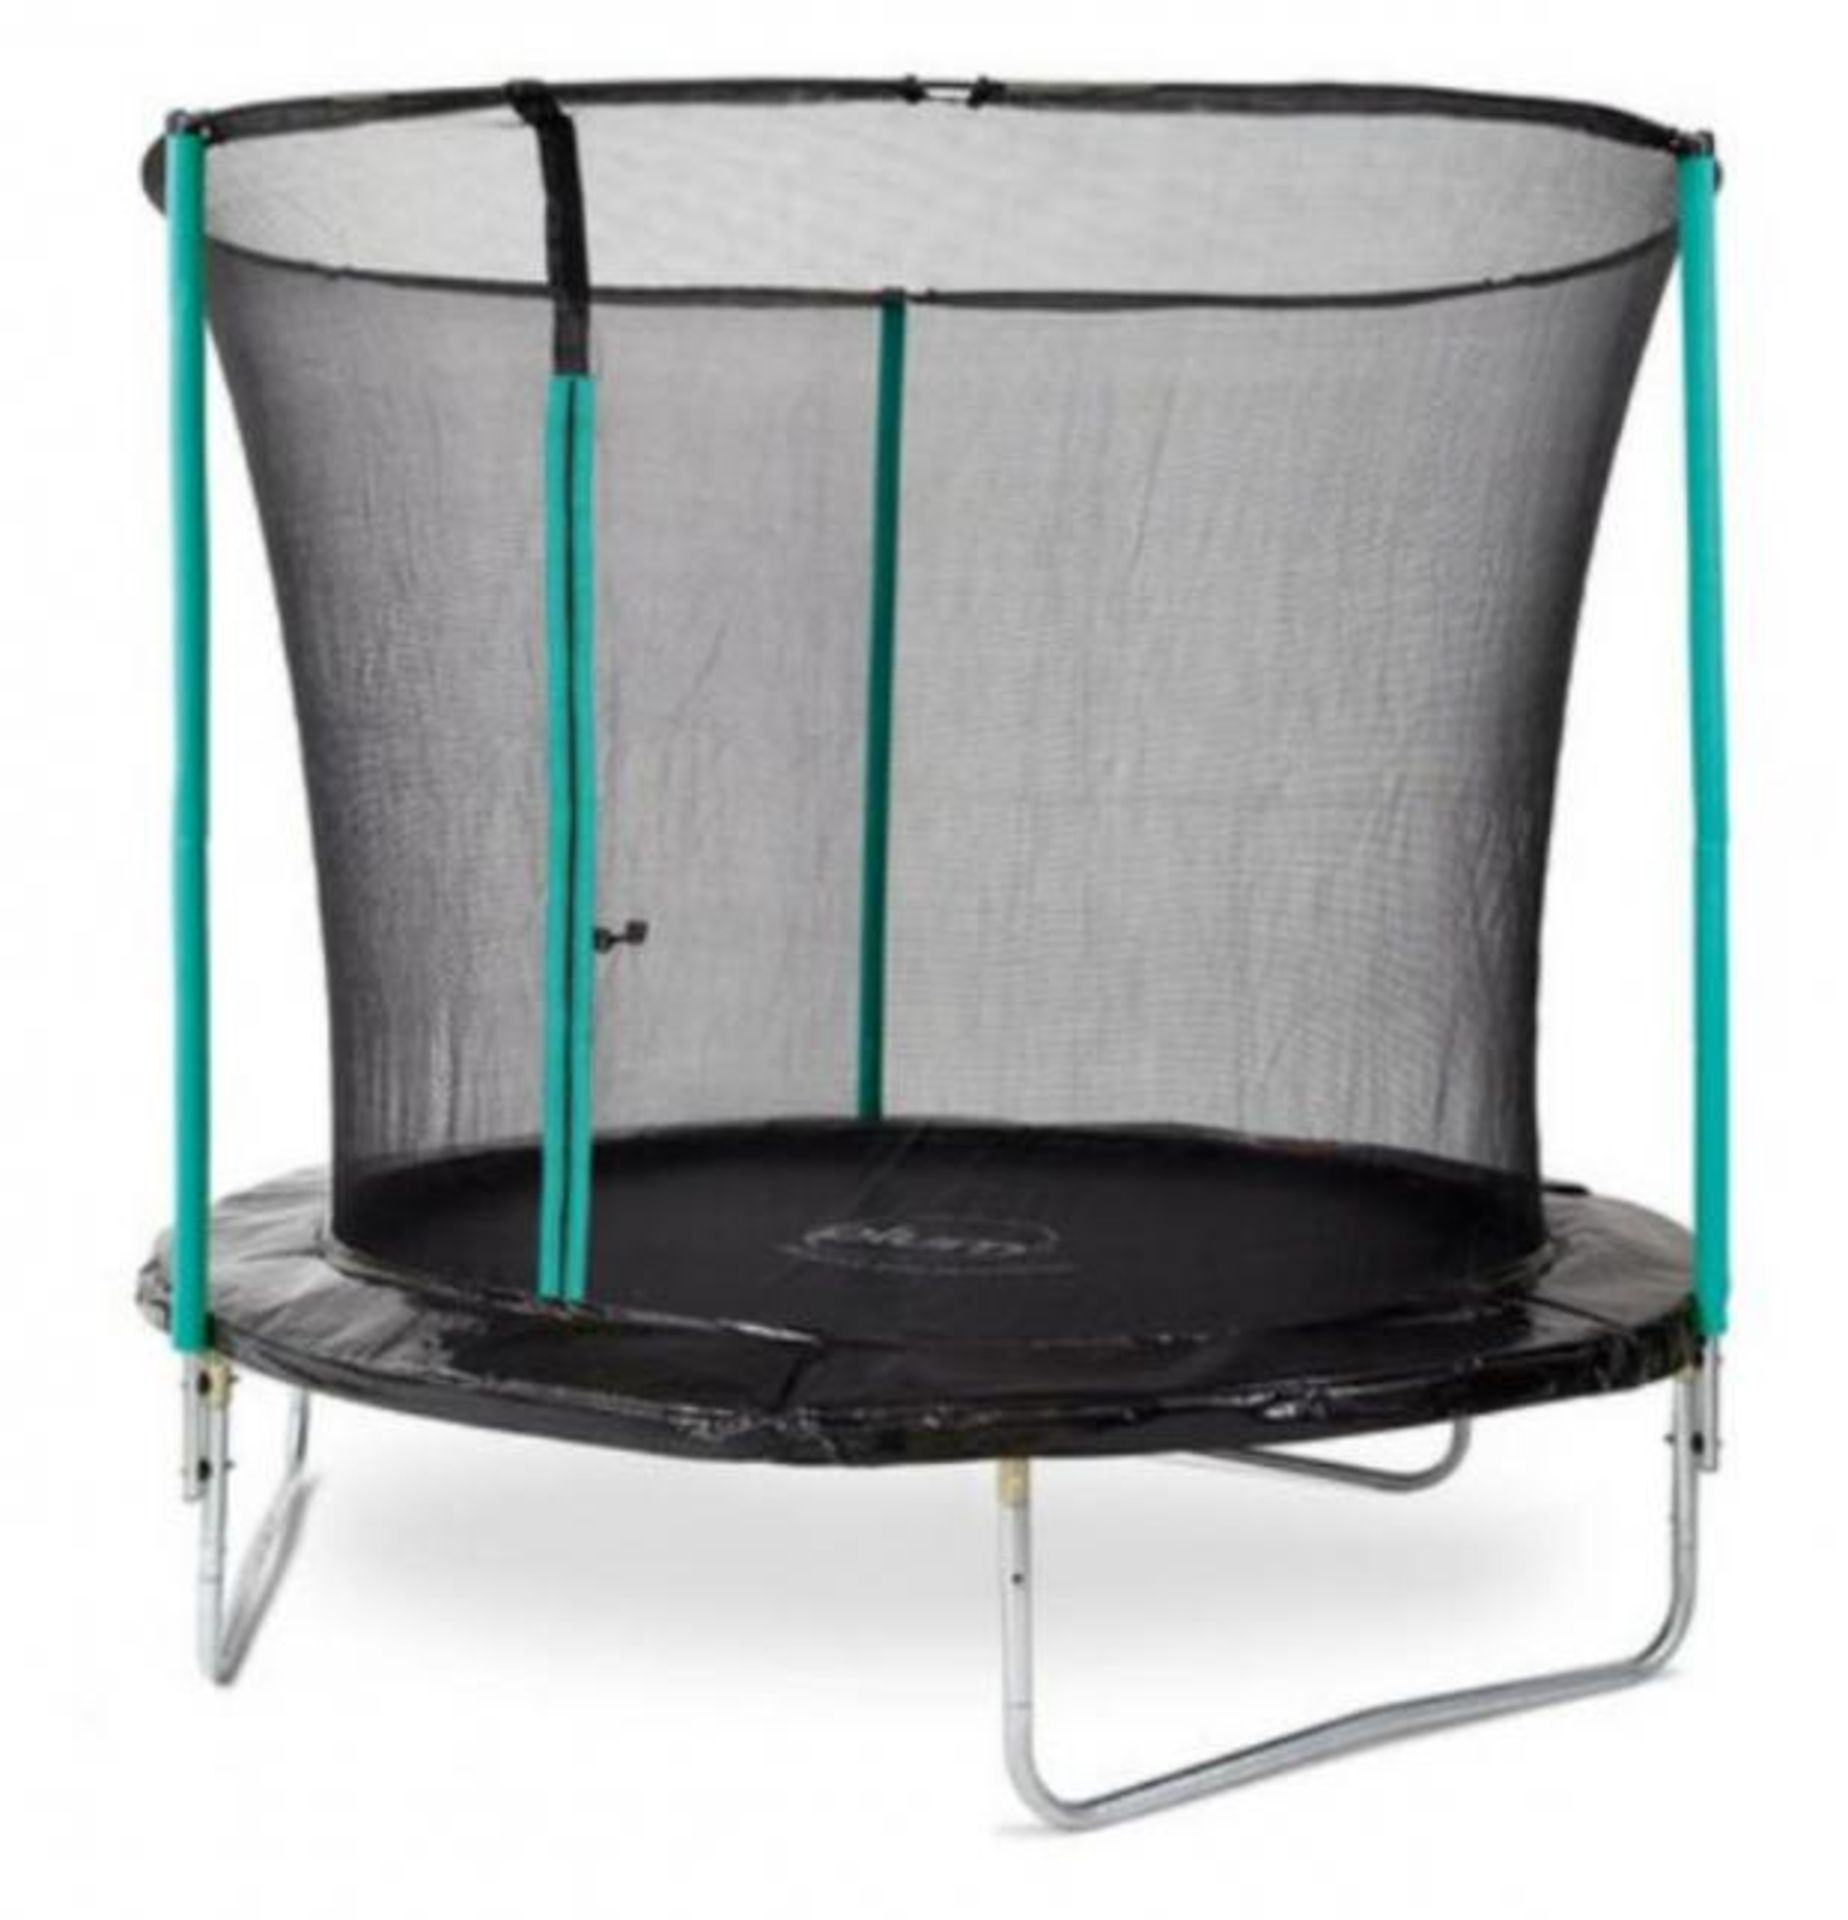 New Boxed Plum 8ft Springsafe Trampoline & Enclosure. The 8ft trampoline with 2G enclosure net - Image 3 of 5